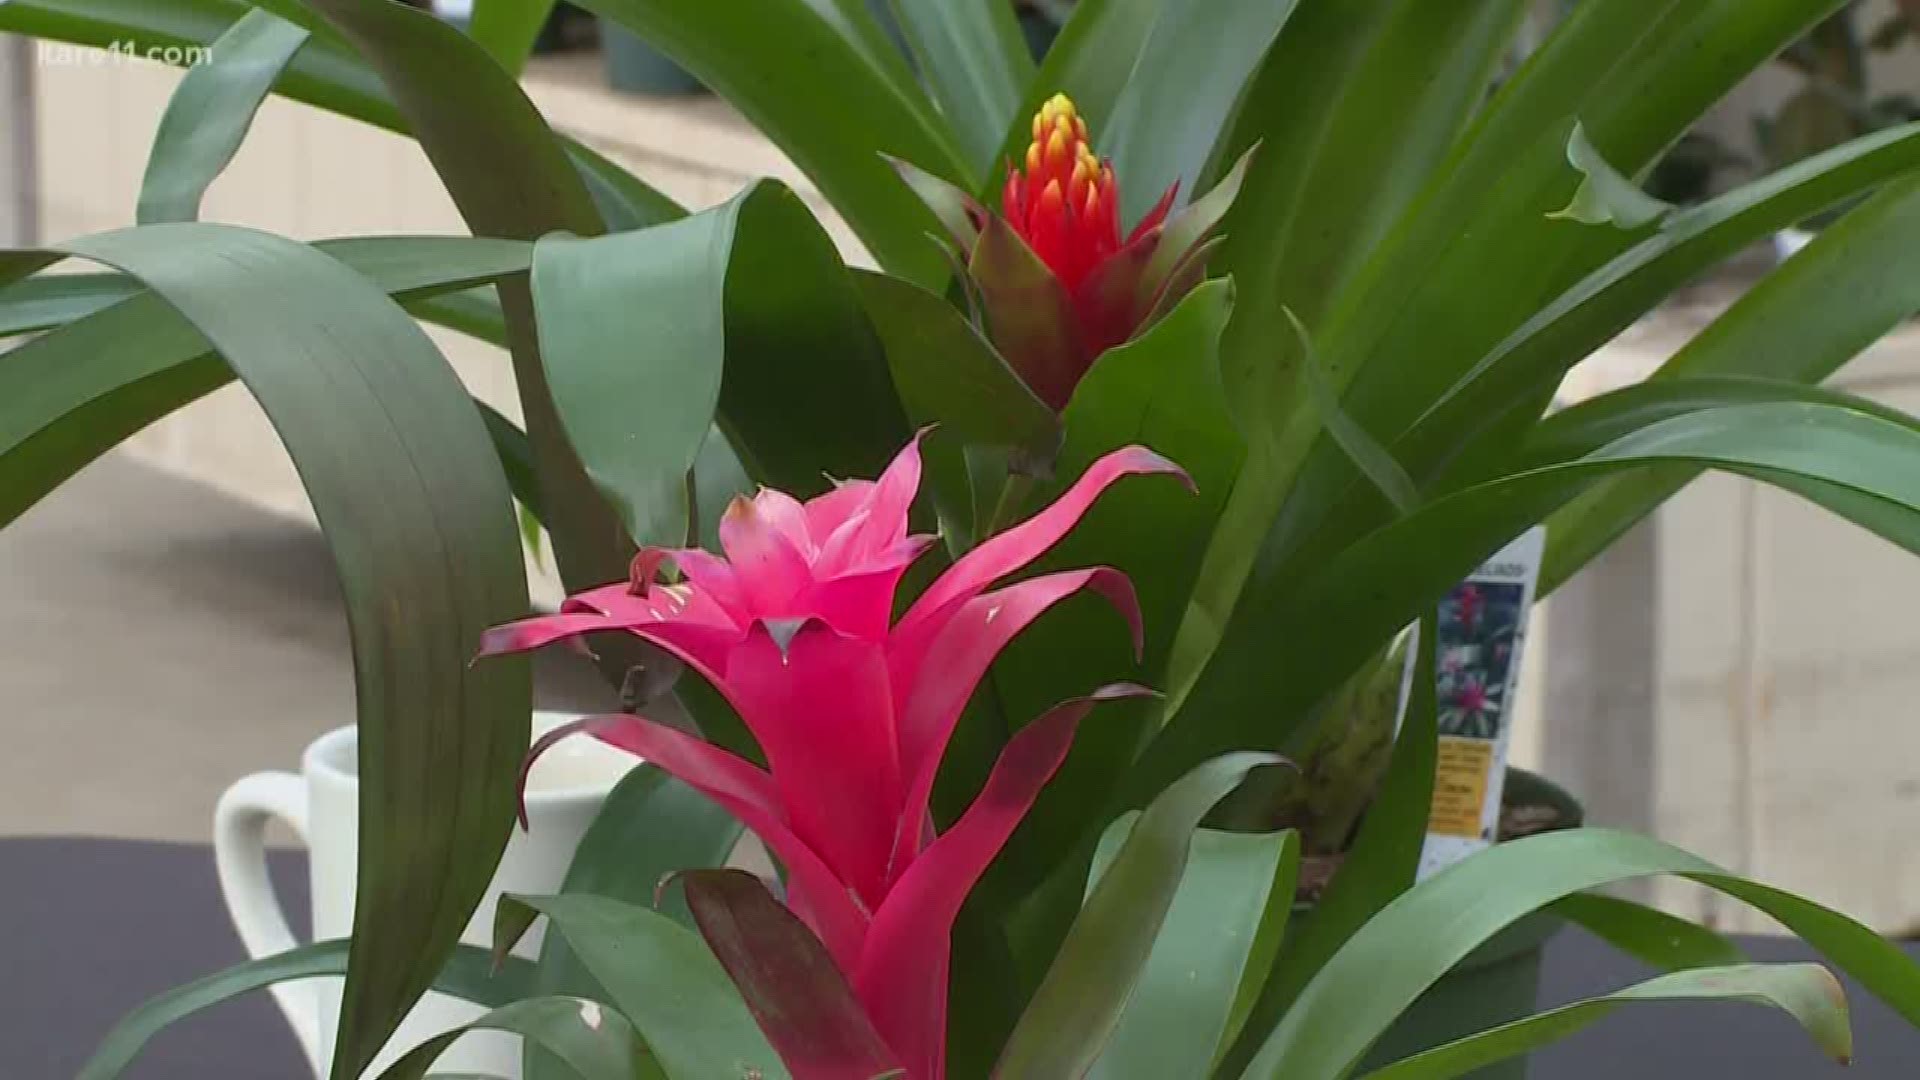 Bromeliads, our January Plant of the Month, provide great sturdy color for your winter home that can at times feel a bit drab.